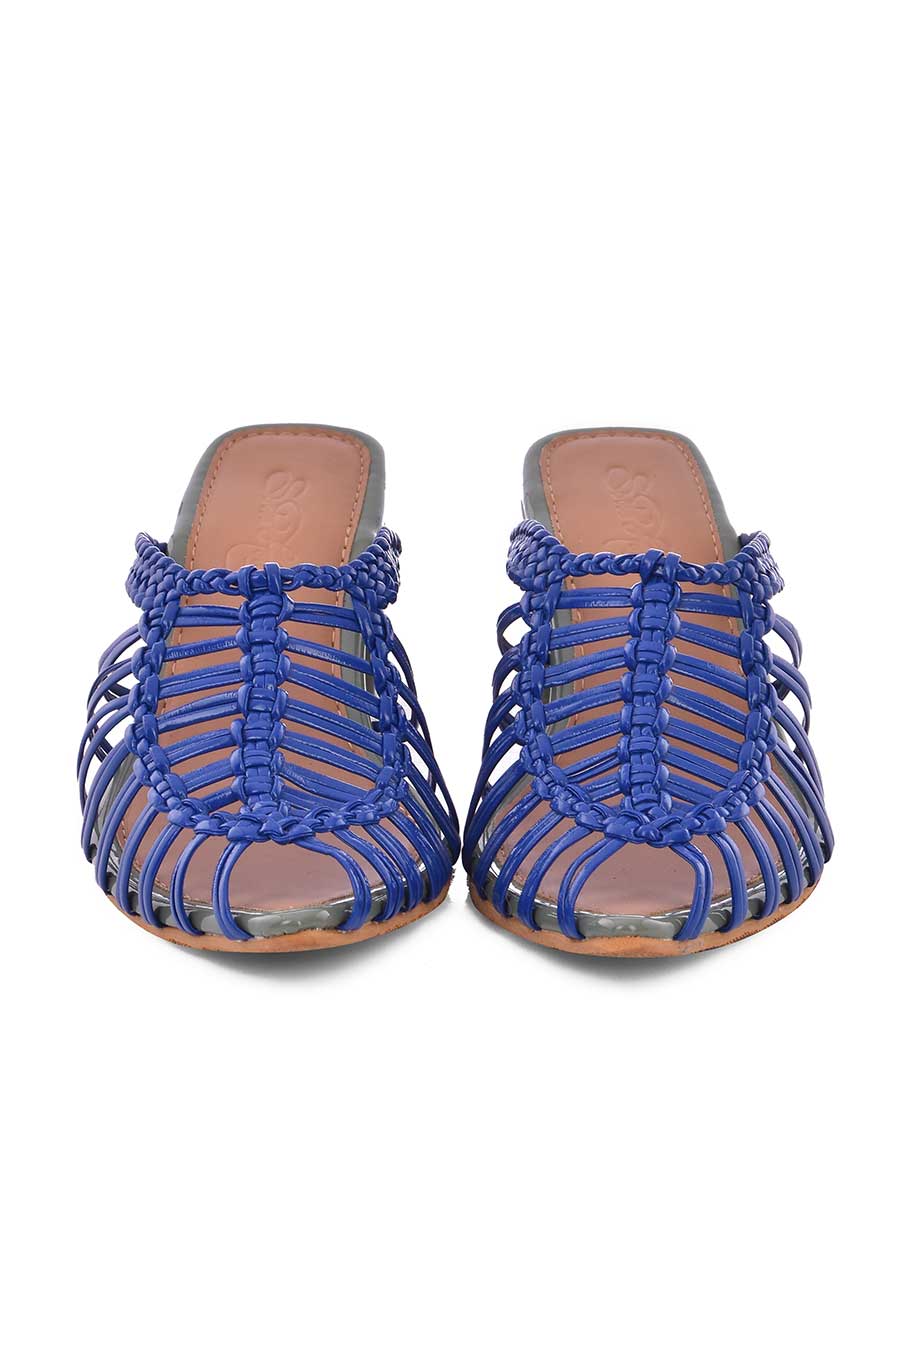 Electric Blue Woven Mules with Heels